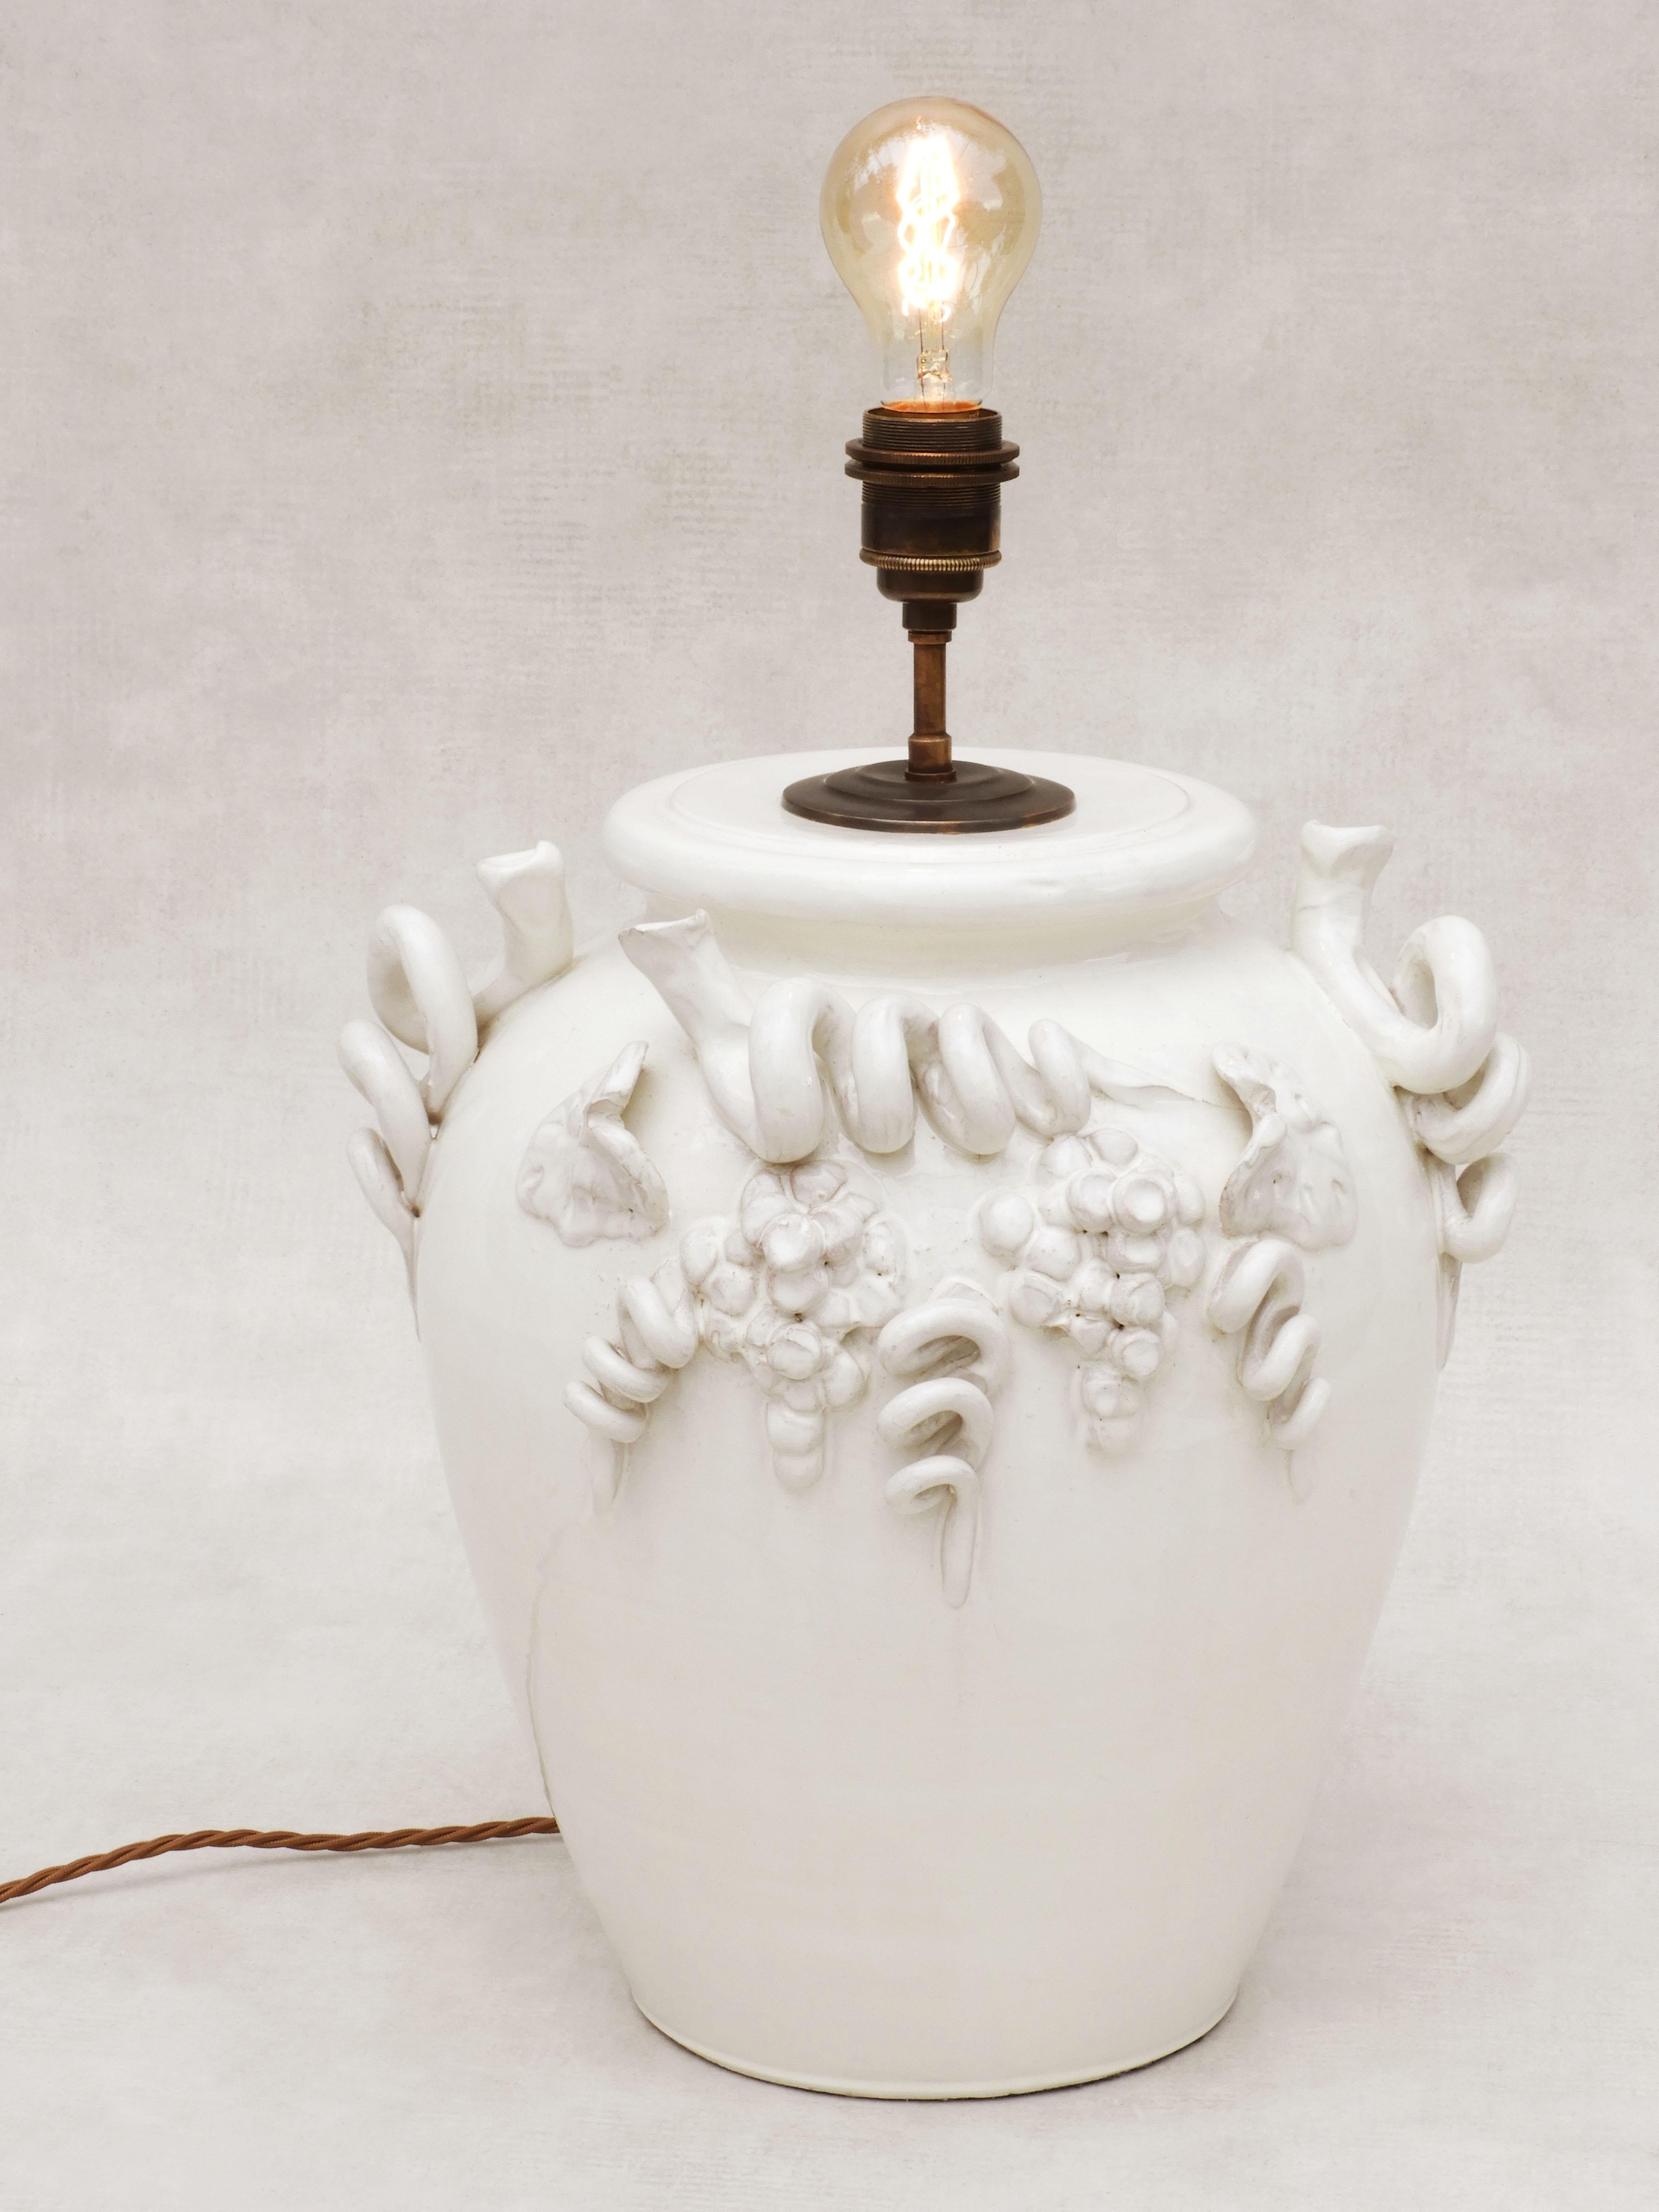 French Provincial Large Vintage French Vine Themed White Glazed Terracotta Table Lamp